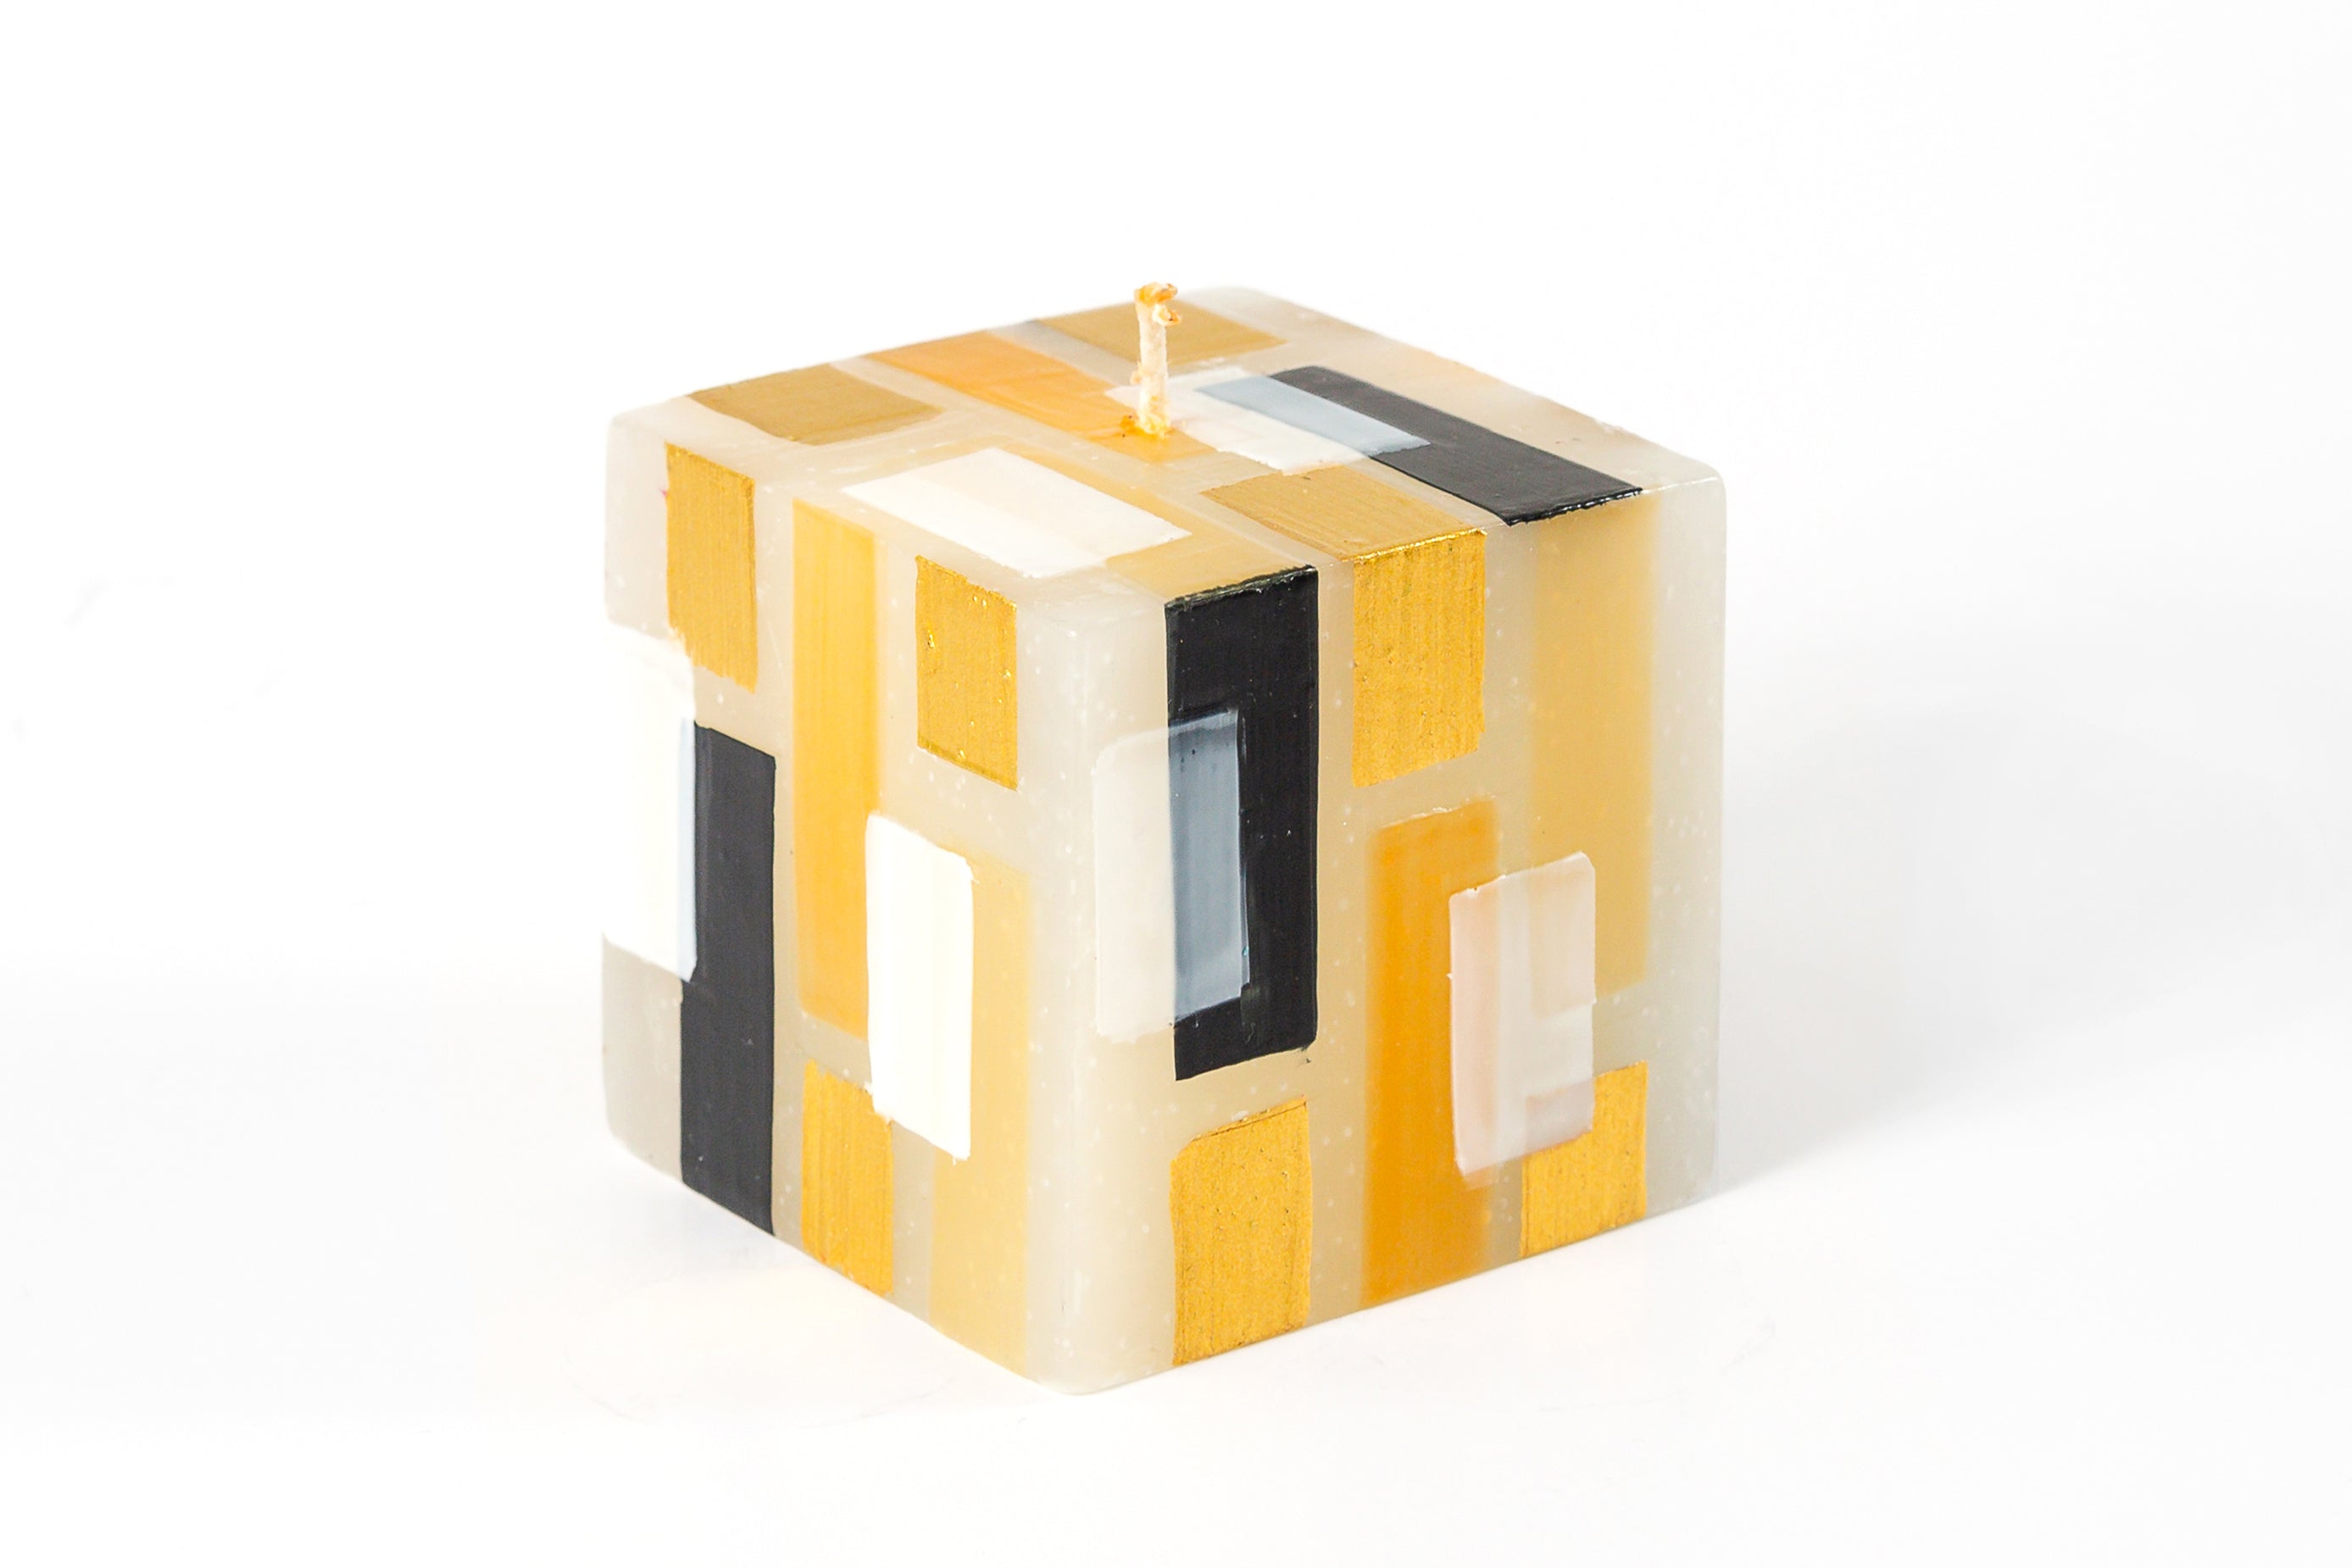 Klimt 3x3x3" cube candle. Creamy white base color candles with touches of black, gold and white.